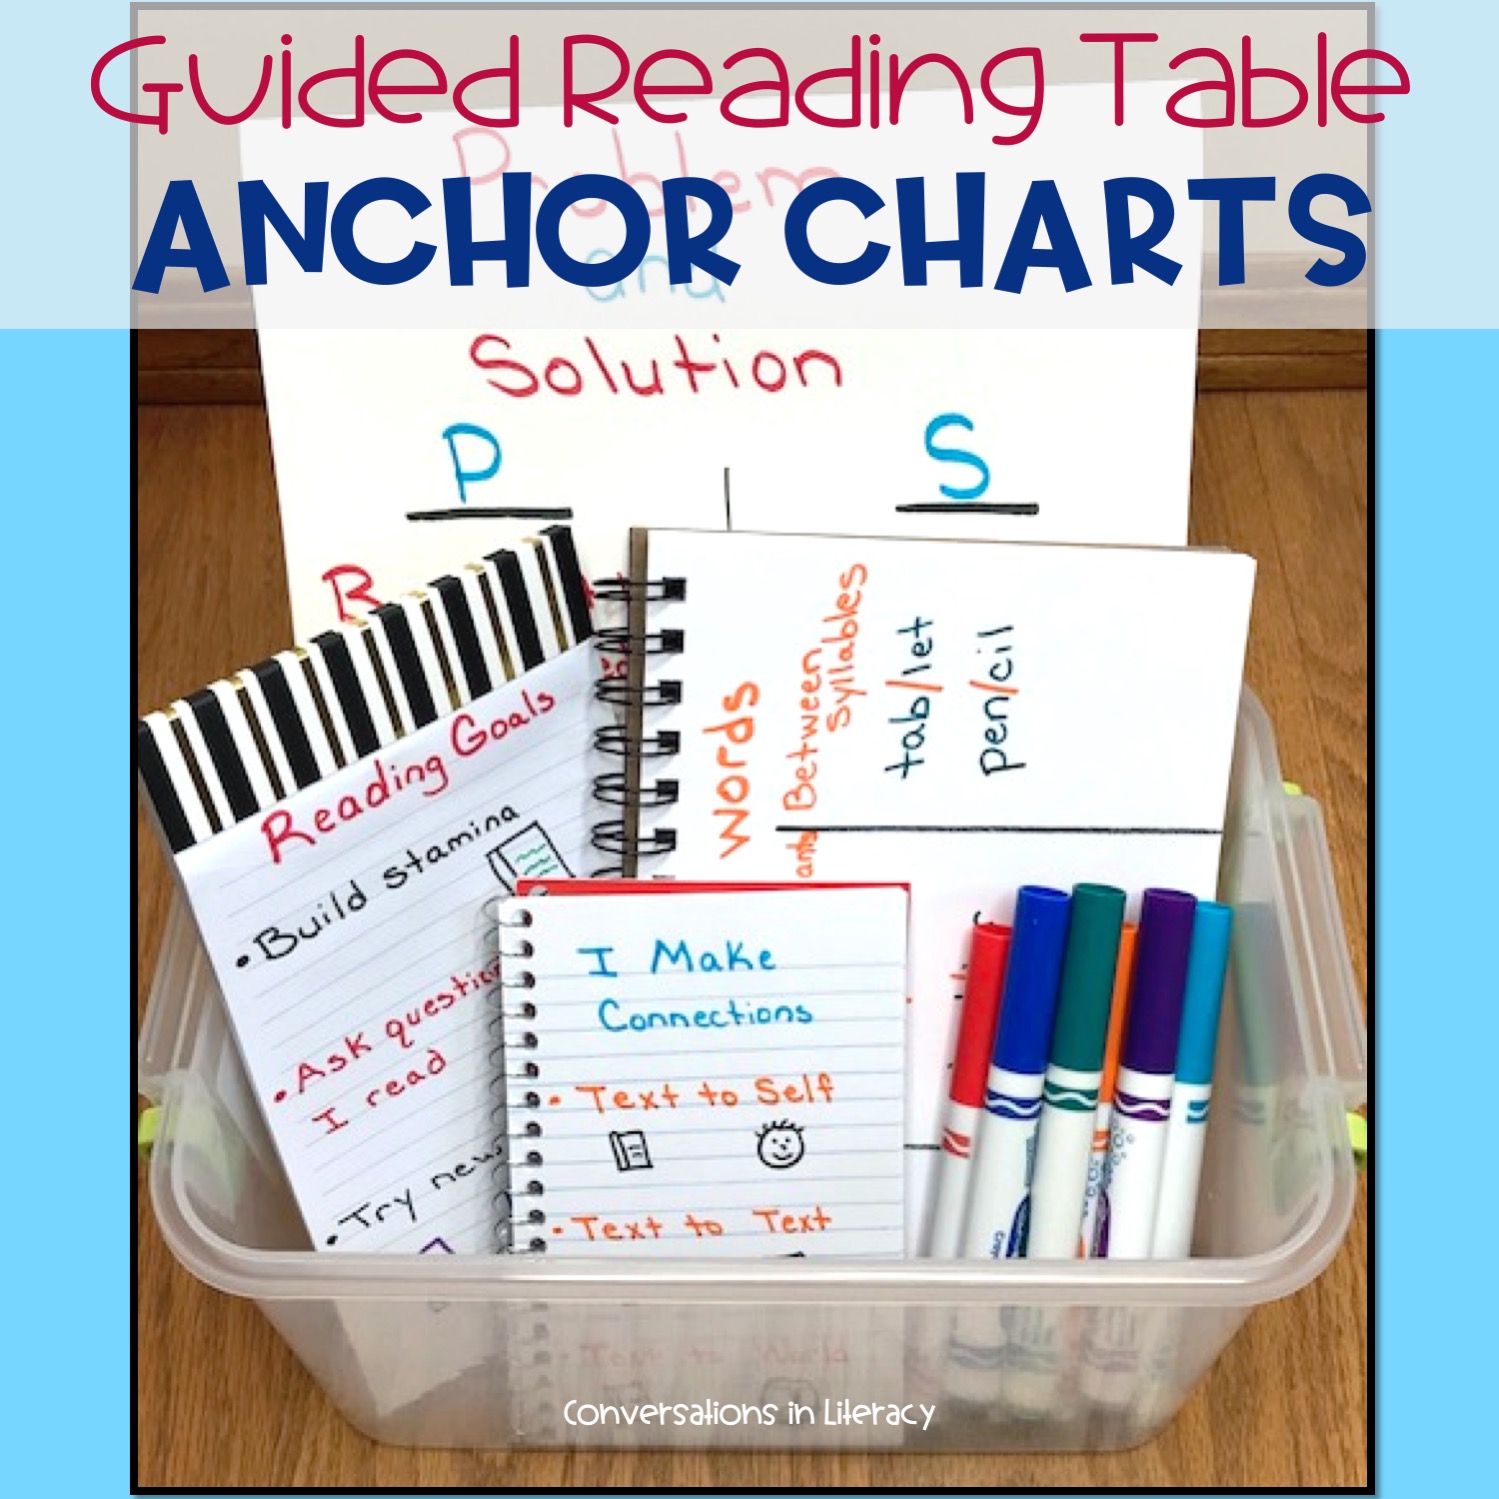 Phonics Charts For Guided Reading And Writing